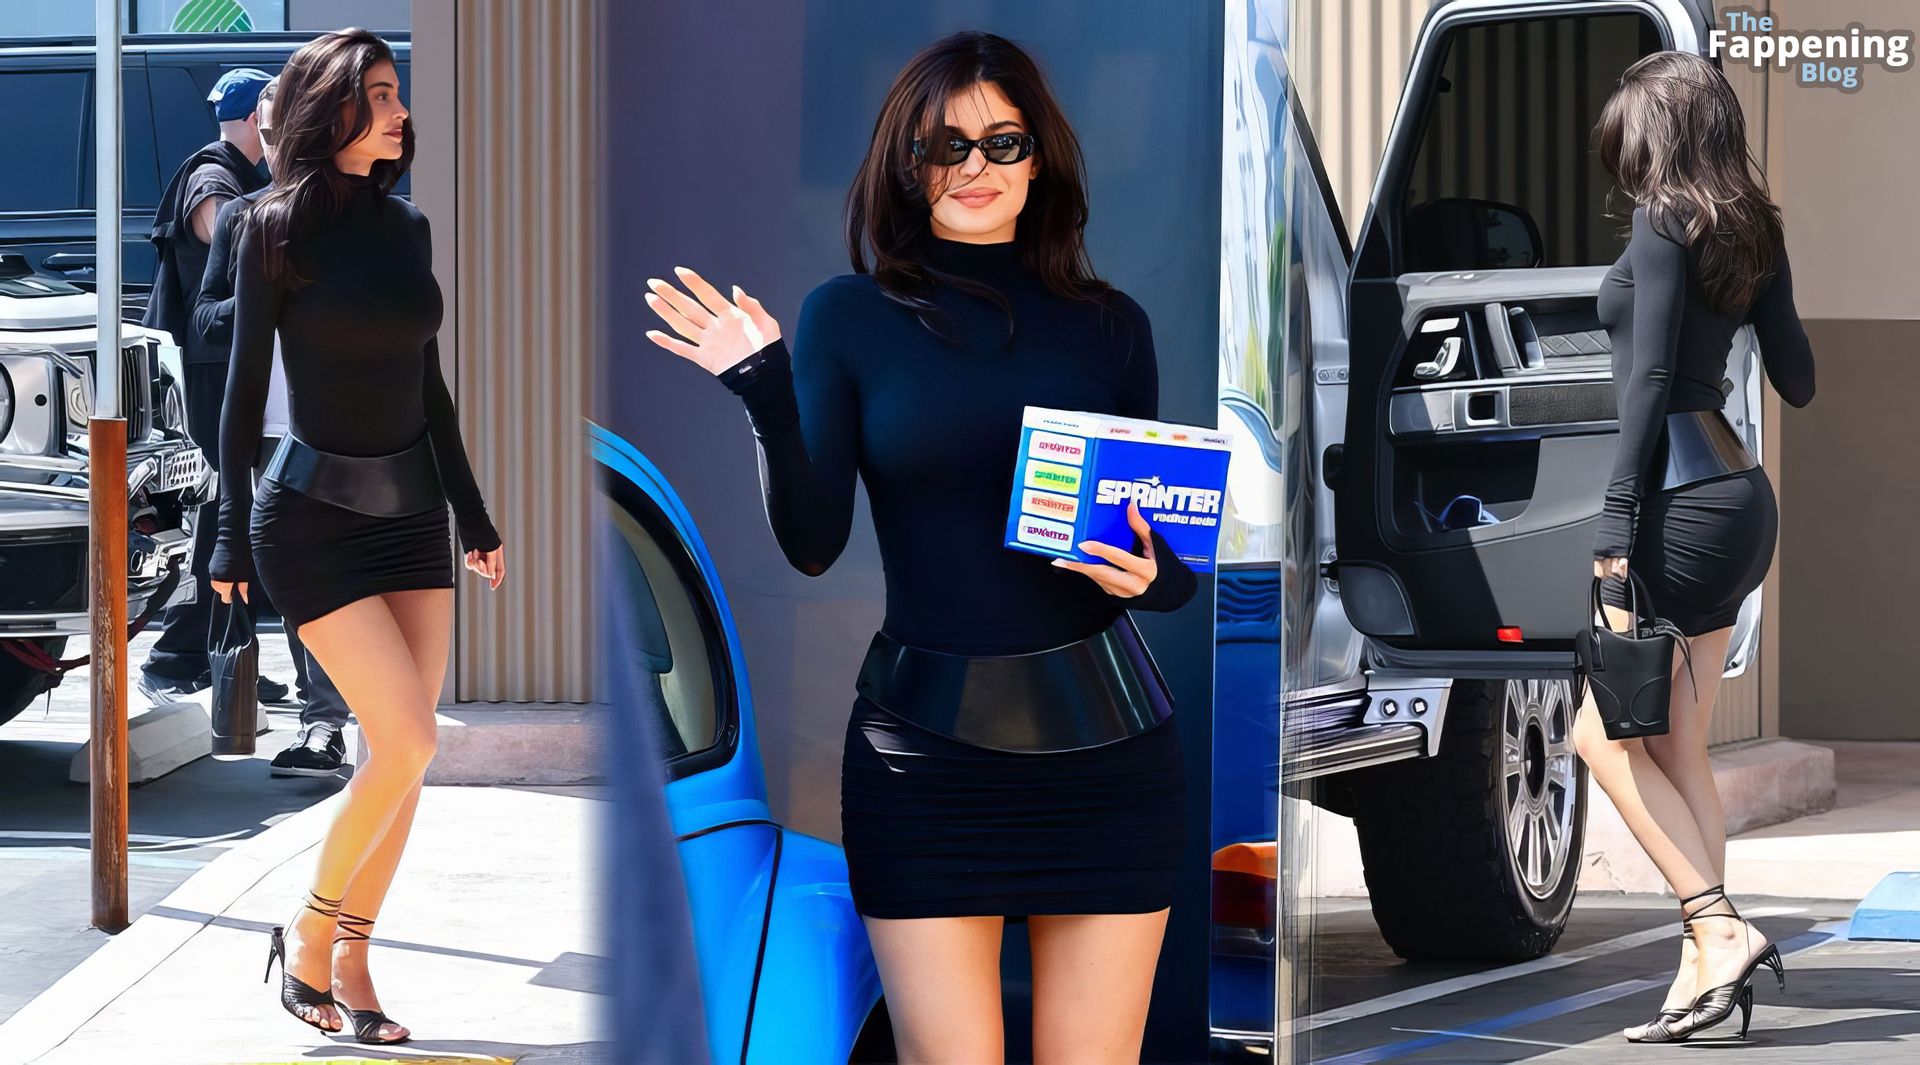 Kylie-Jenner-Sexy-Legs-and-CUrves-2-thefappeningblog.com_.jpg